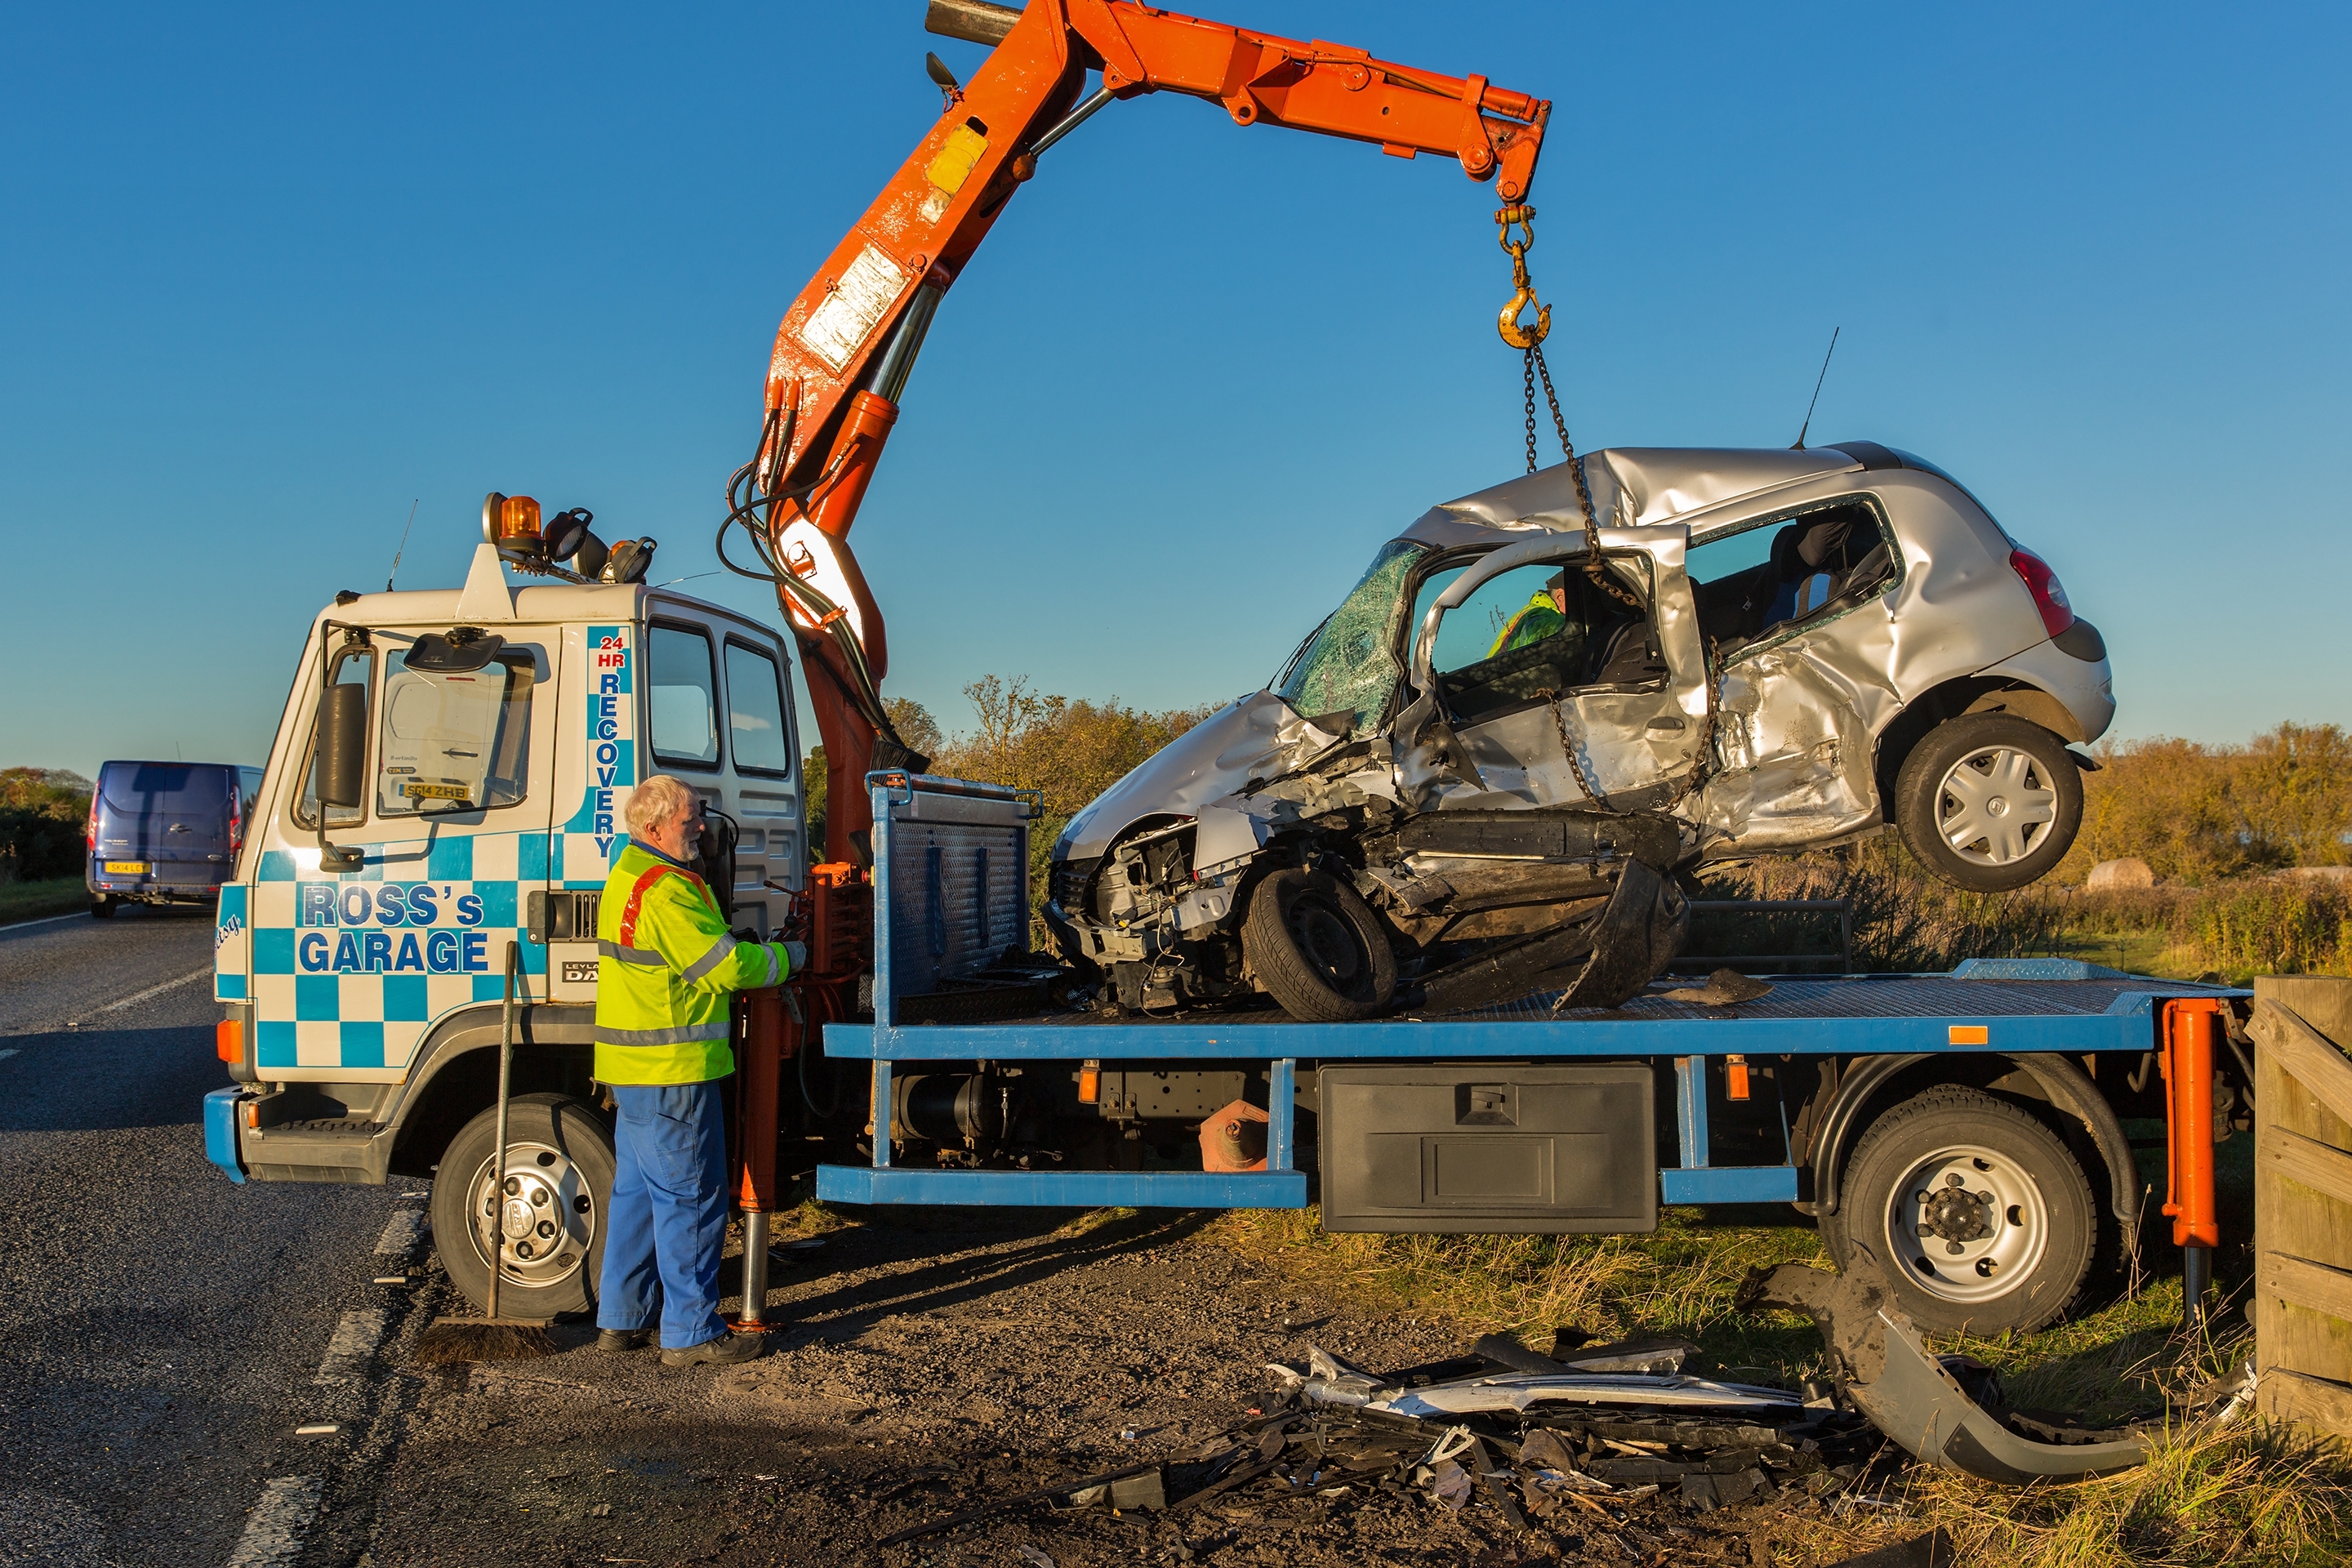 The Renault Clio being removed from the road